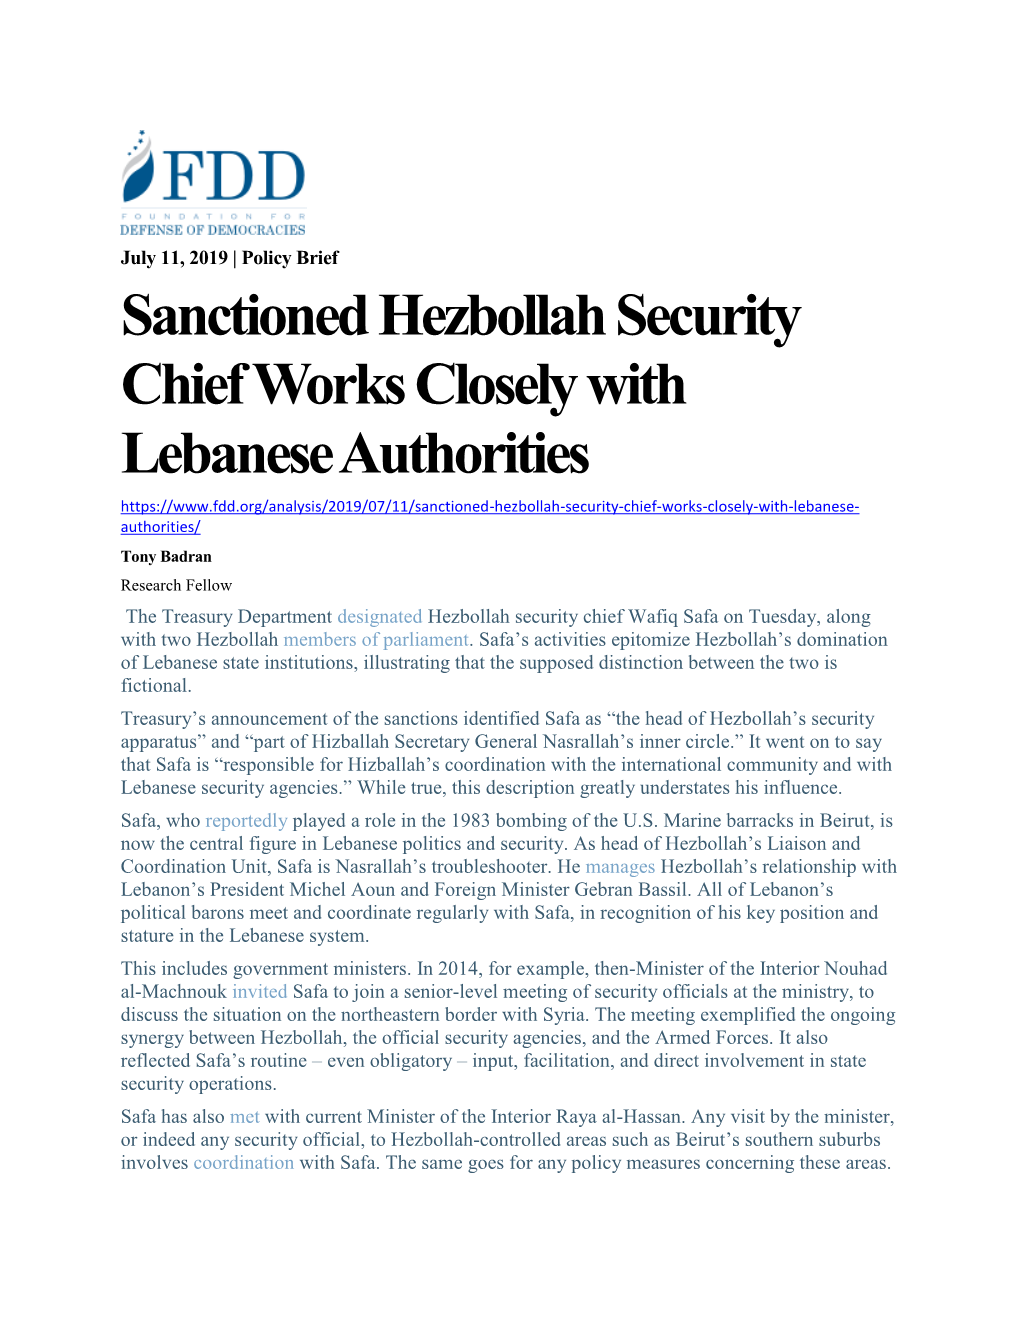 Sanctioned Hezbollah Security Chief Works Closely with Lebanese